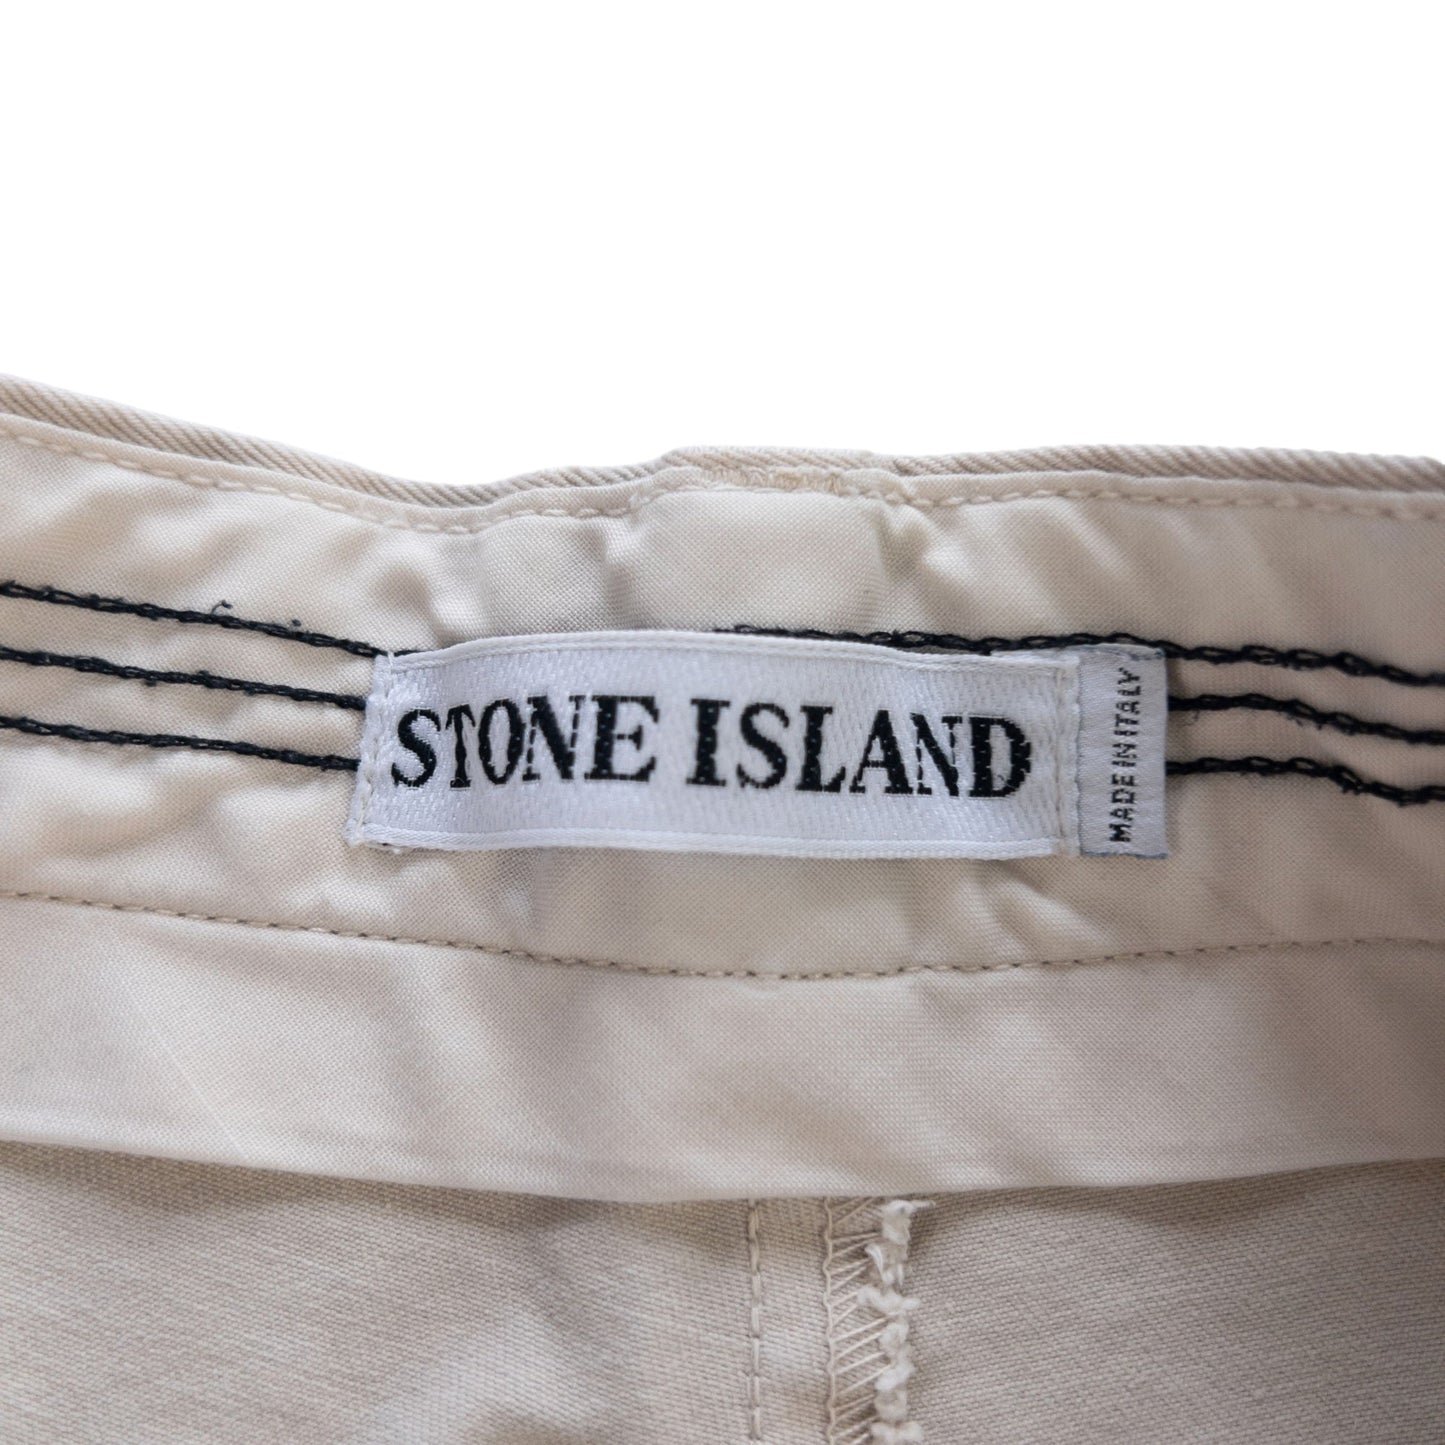 Vintage Stone Island Chino Trousers Size W32